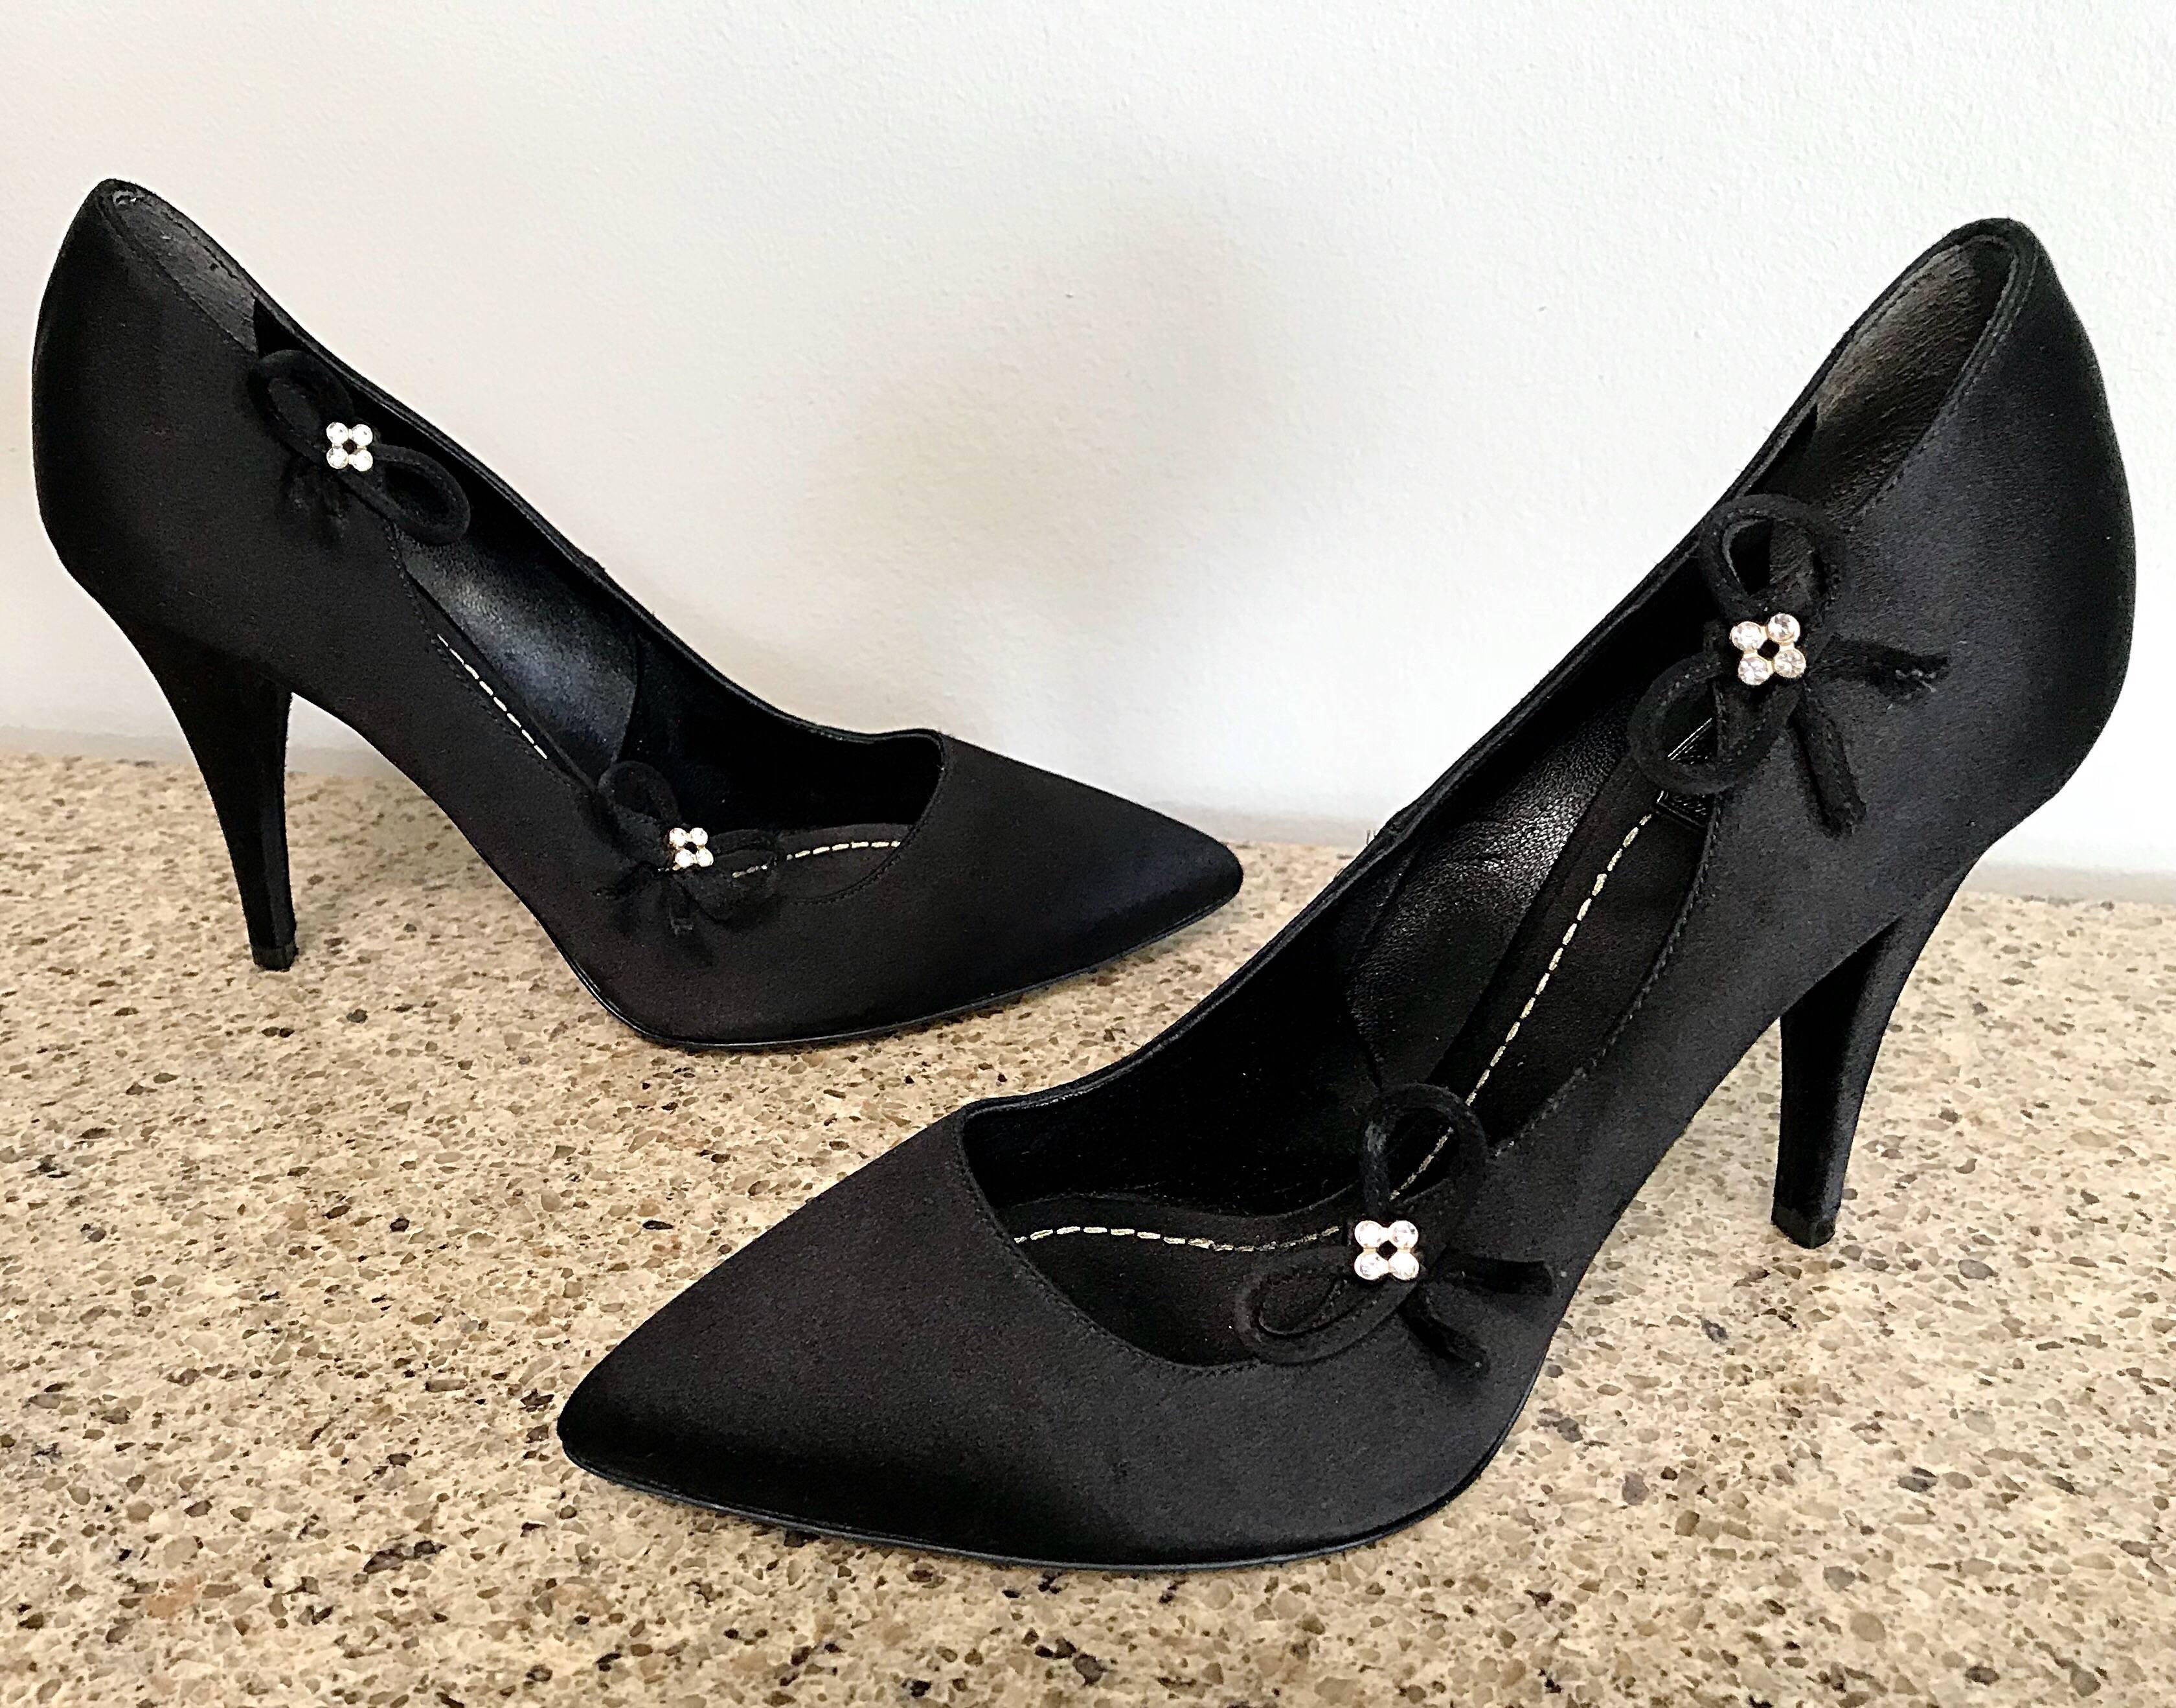 Gorgeous CHRISTIAN DIOR by JOHN GALLIANO black silk satin high heels / pumps! These shoes offer so much more than just a basic black shoe! Features an elegant pointy toe. Rhinestone flower details on each shoe. Great with a dress, gown, jeans, or a